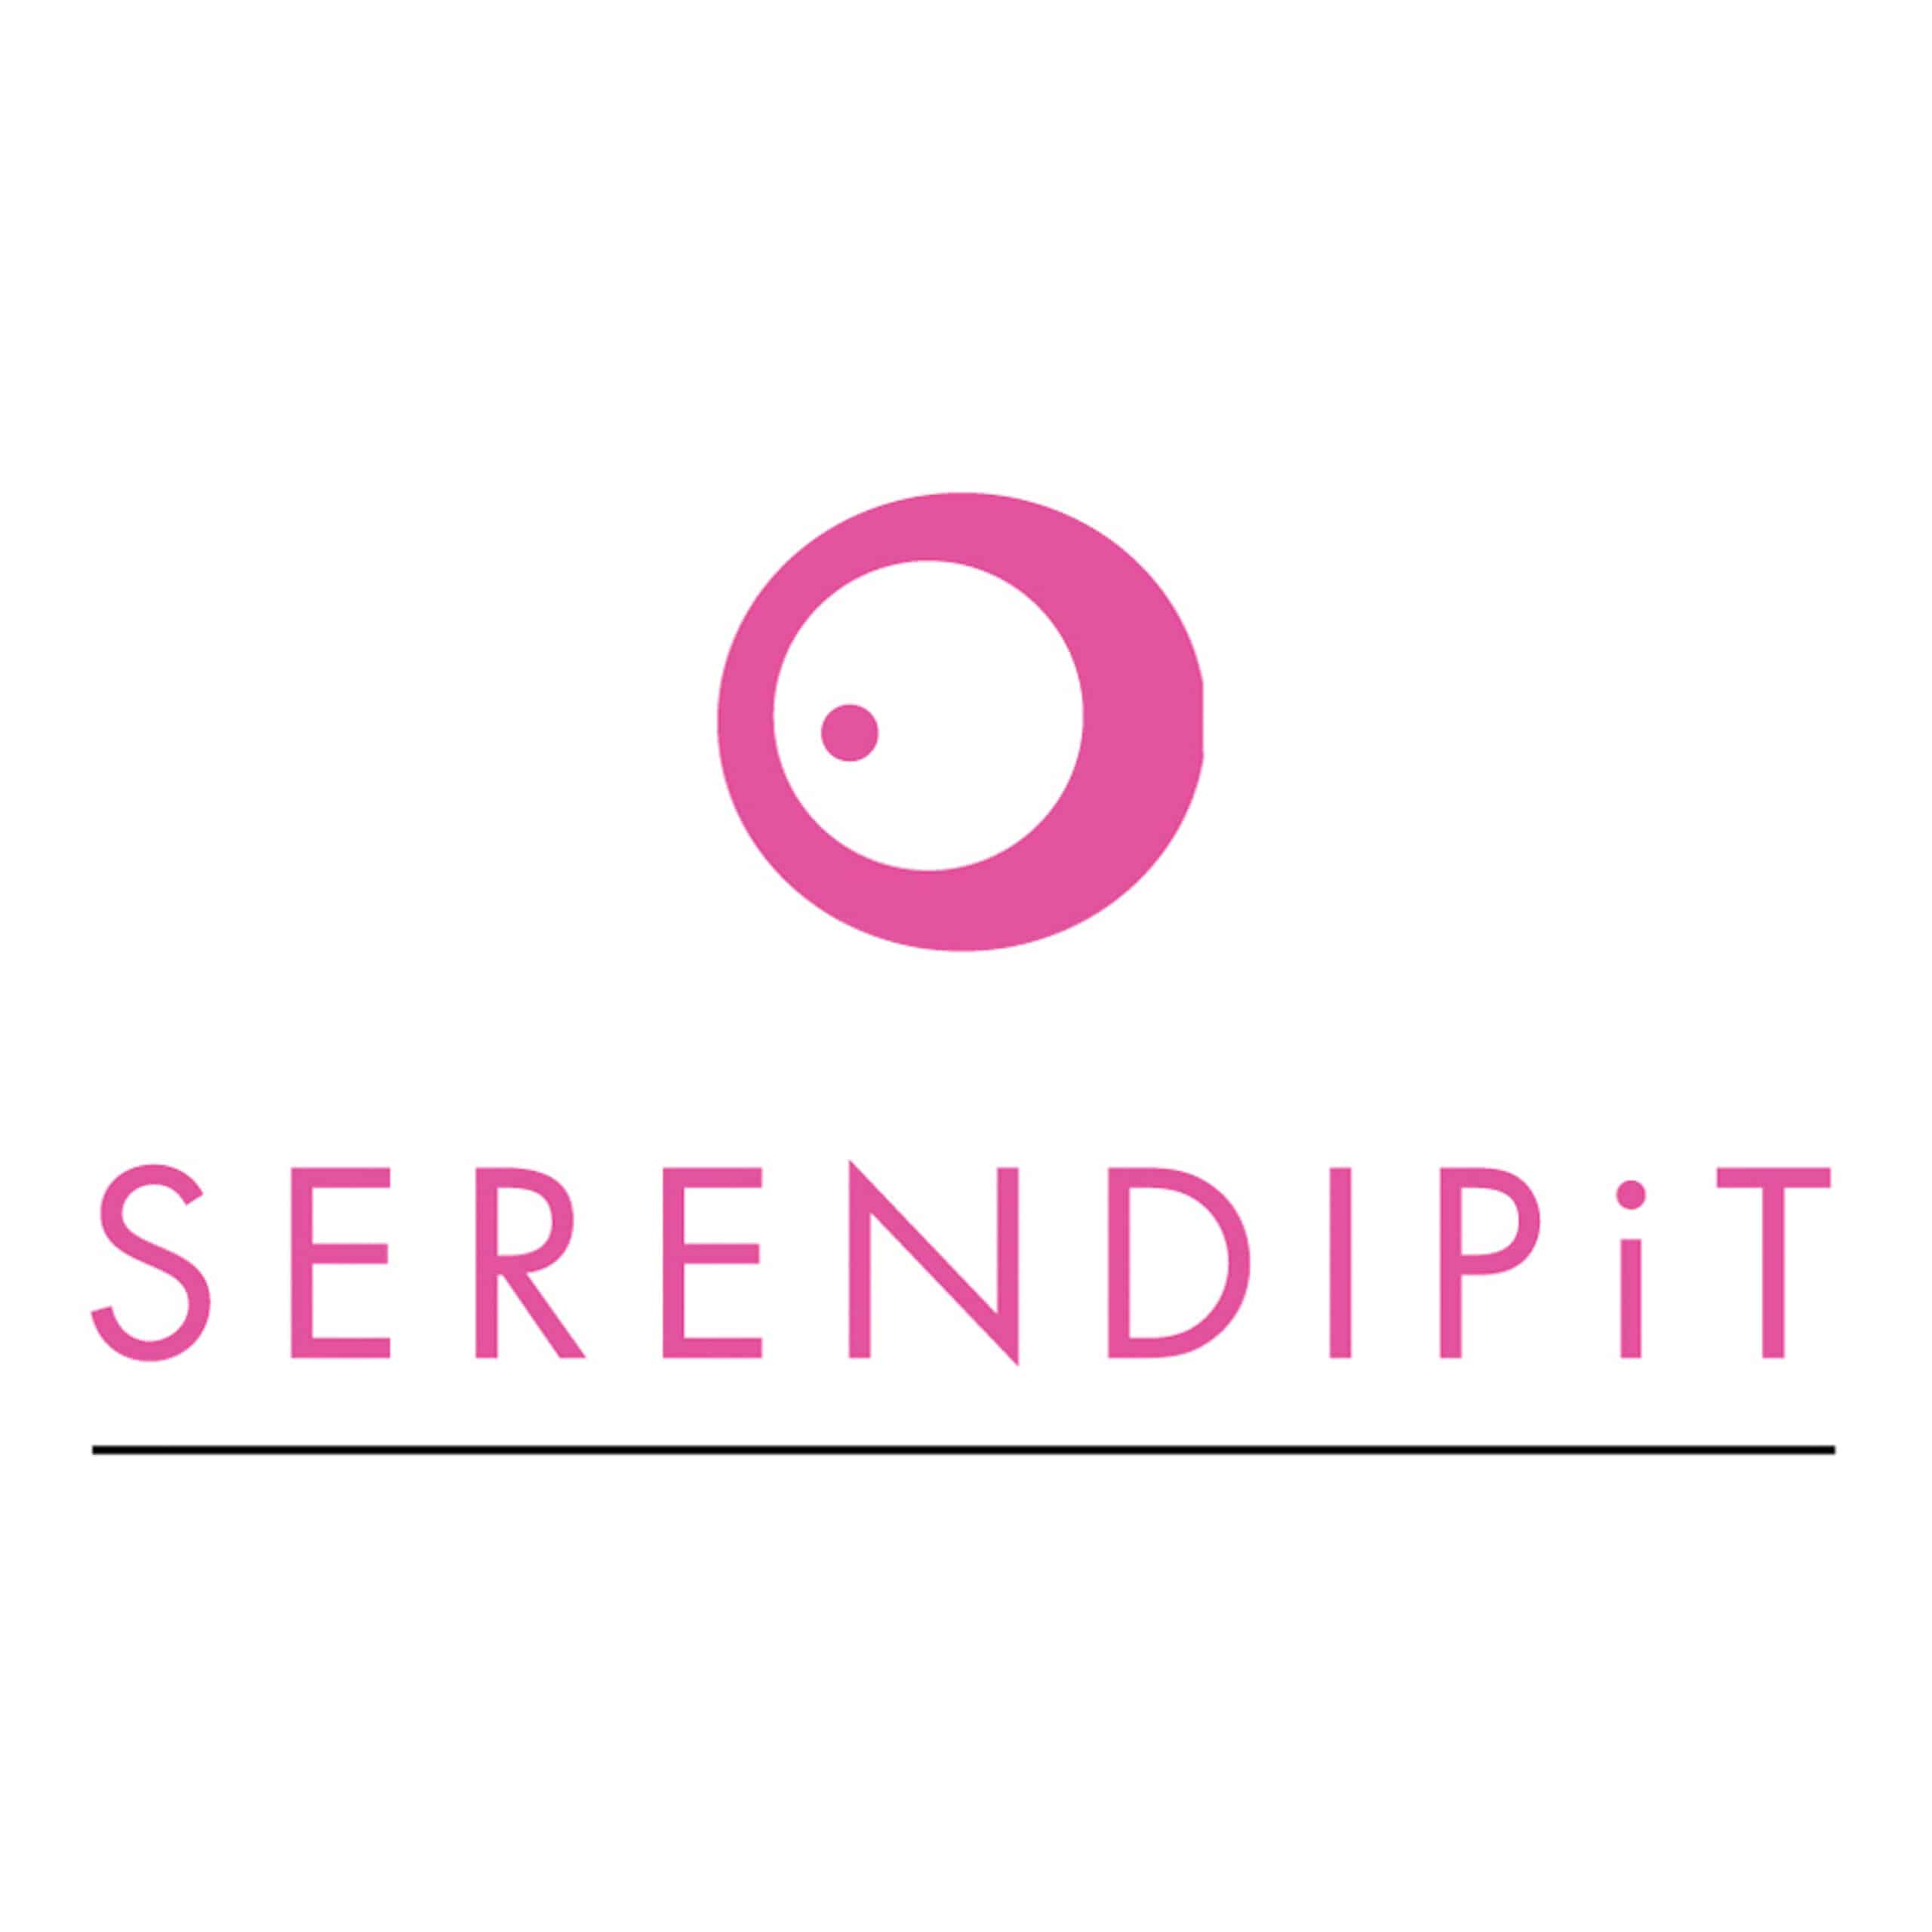 Serendipit Consulting